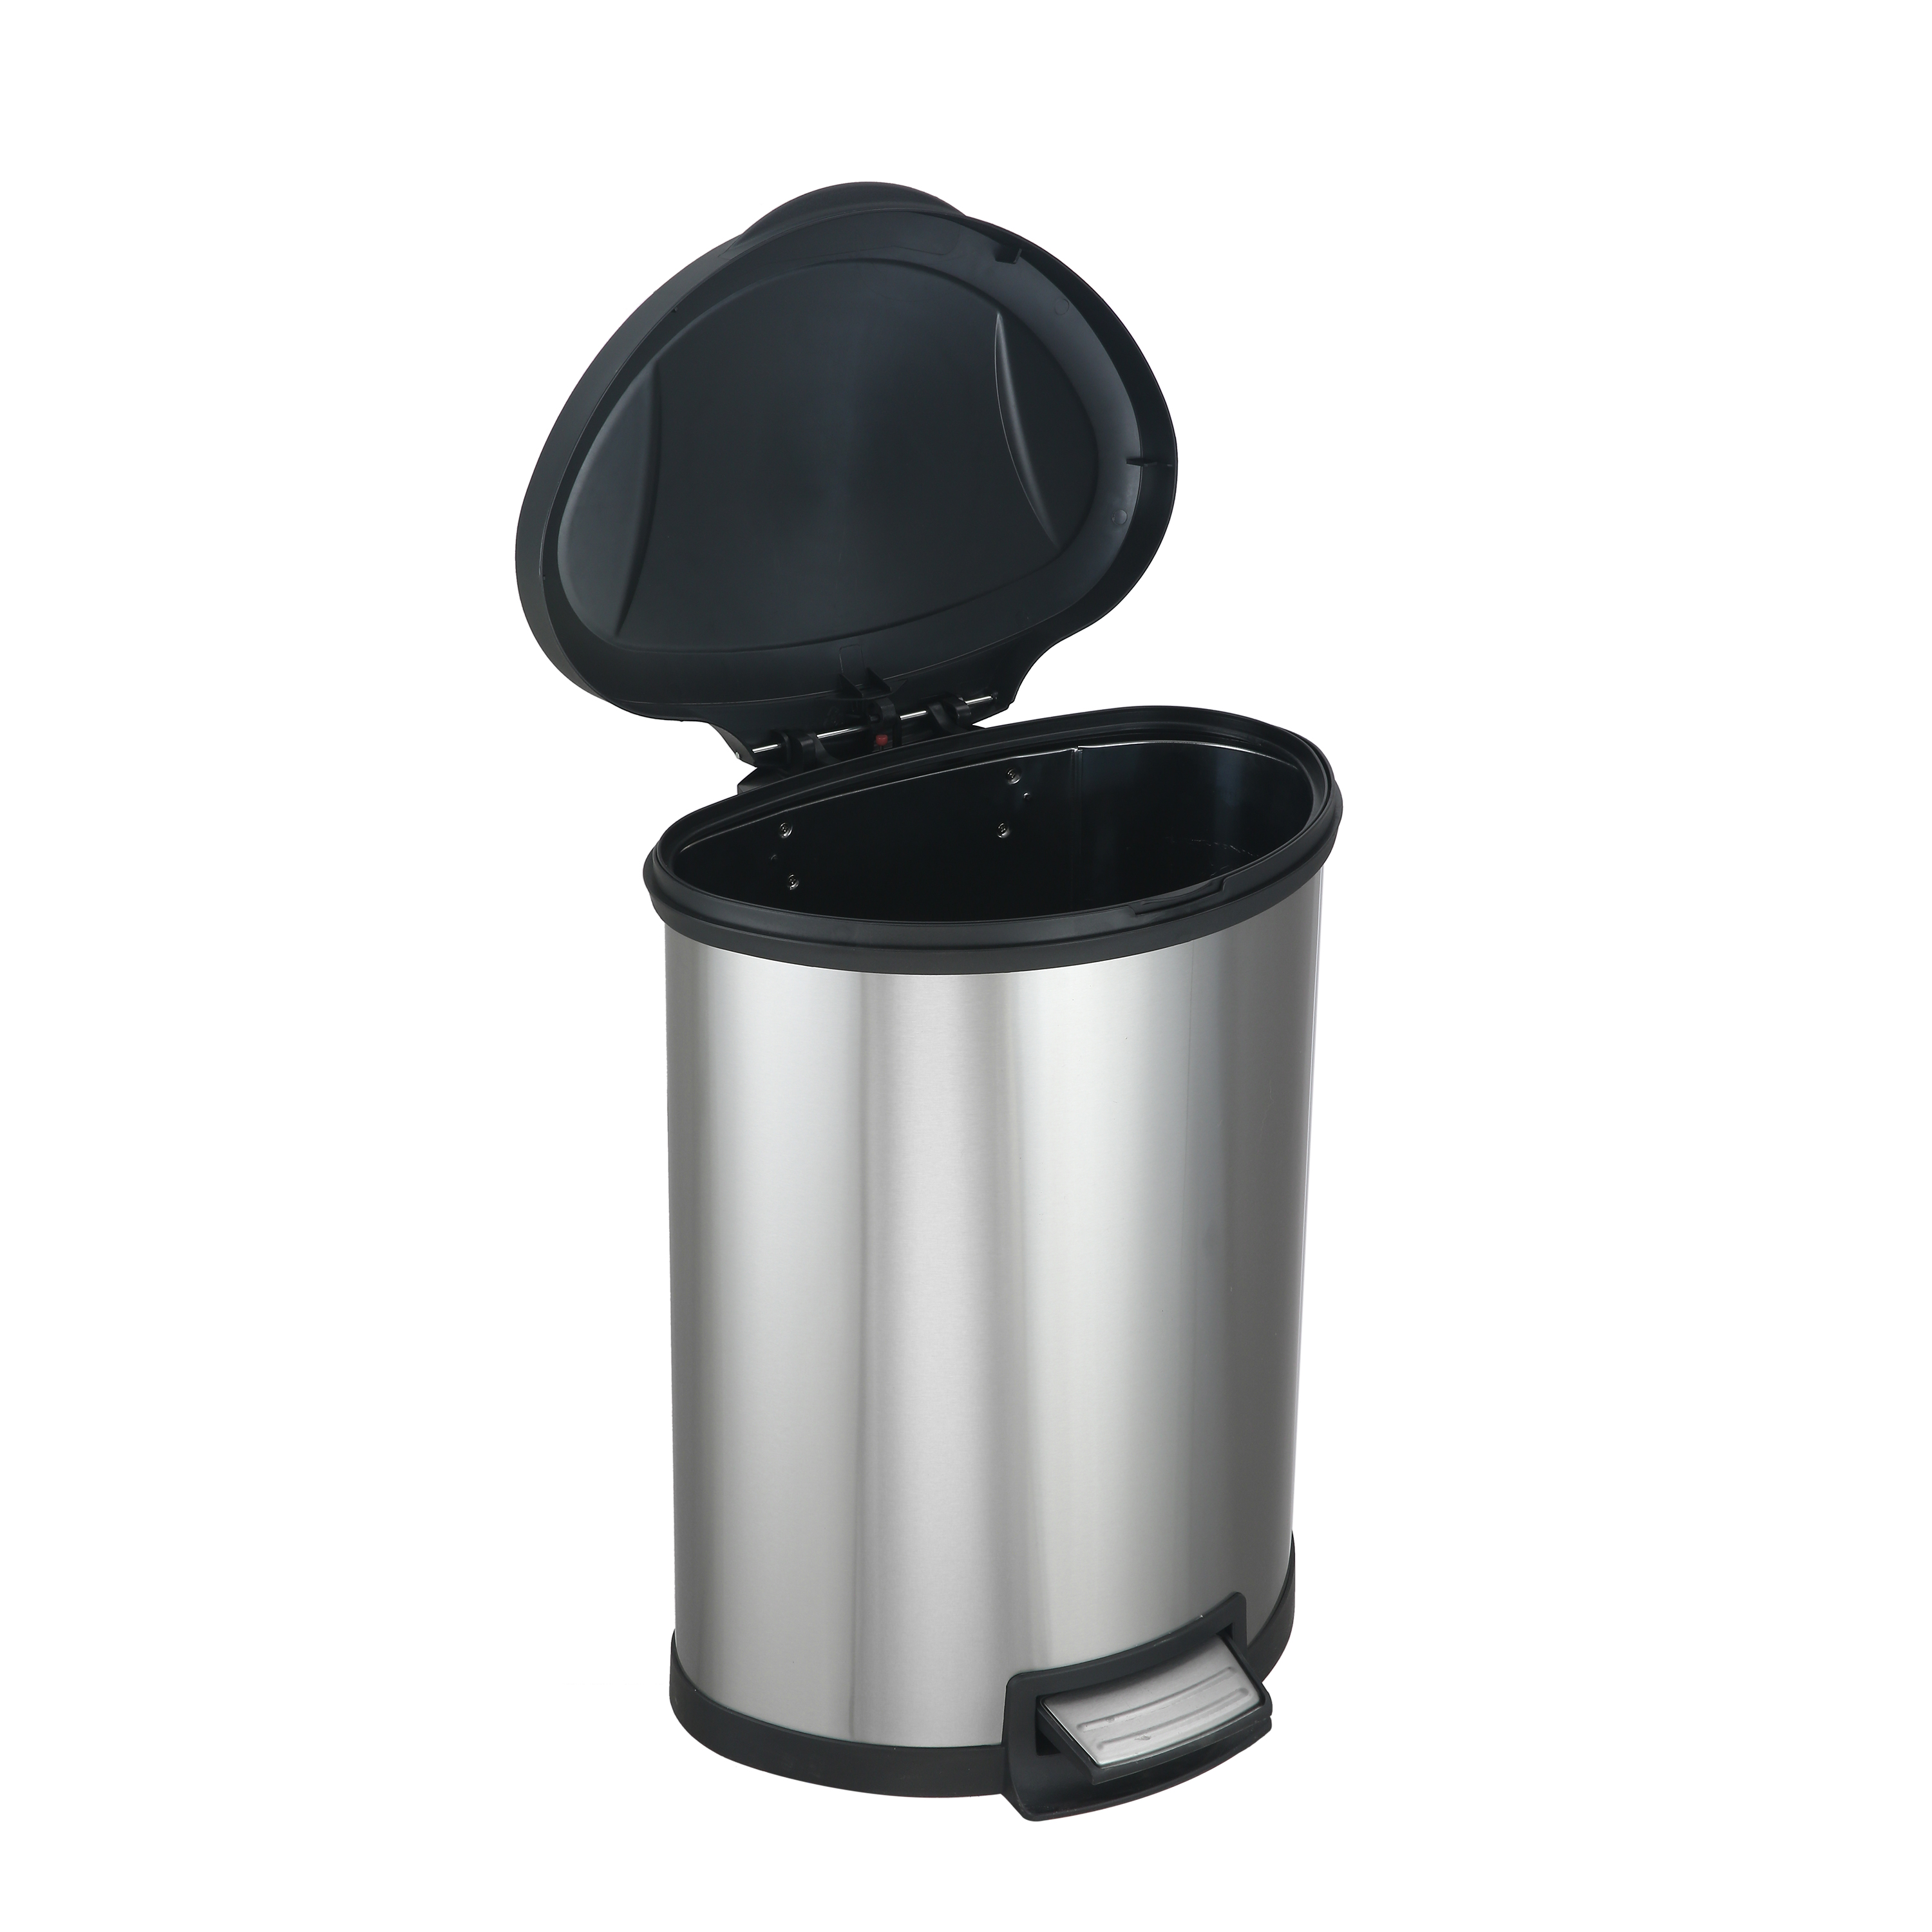 Mainstays 14.2 gal/54 Liter Stainless Steel Semi Round Kitchen Garbage Can with Lid - image 2 of 5